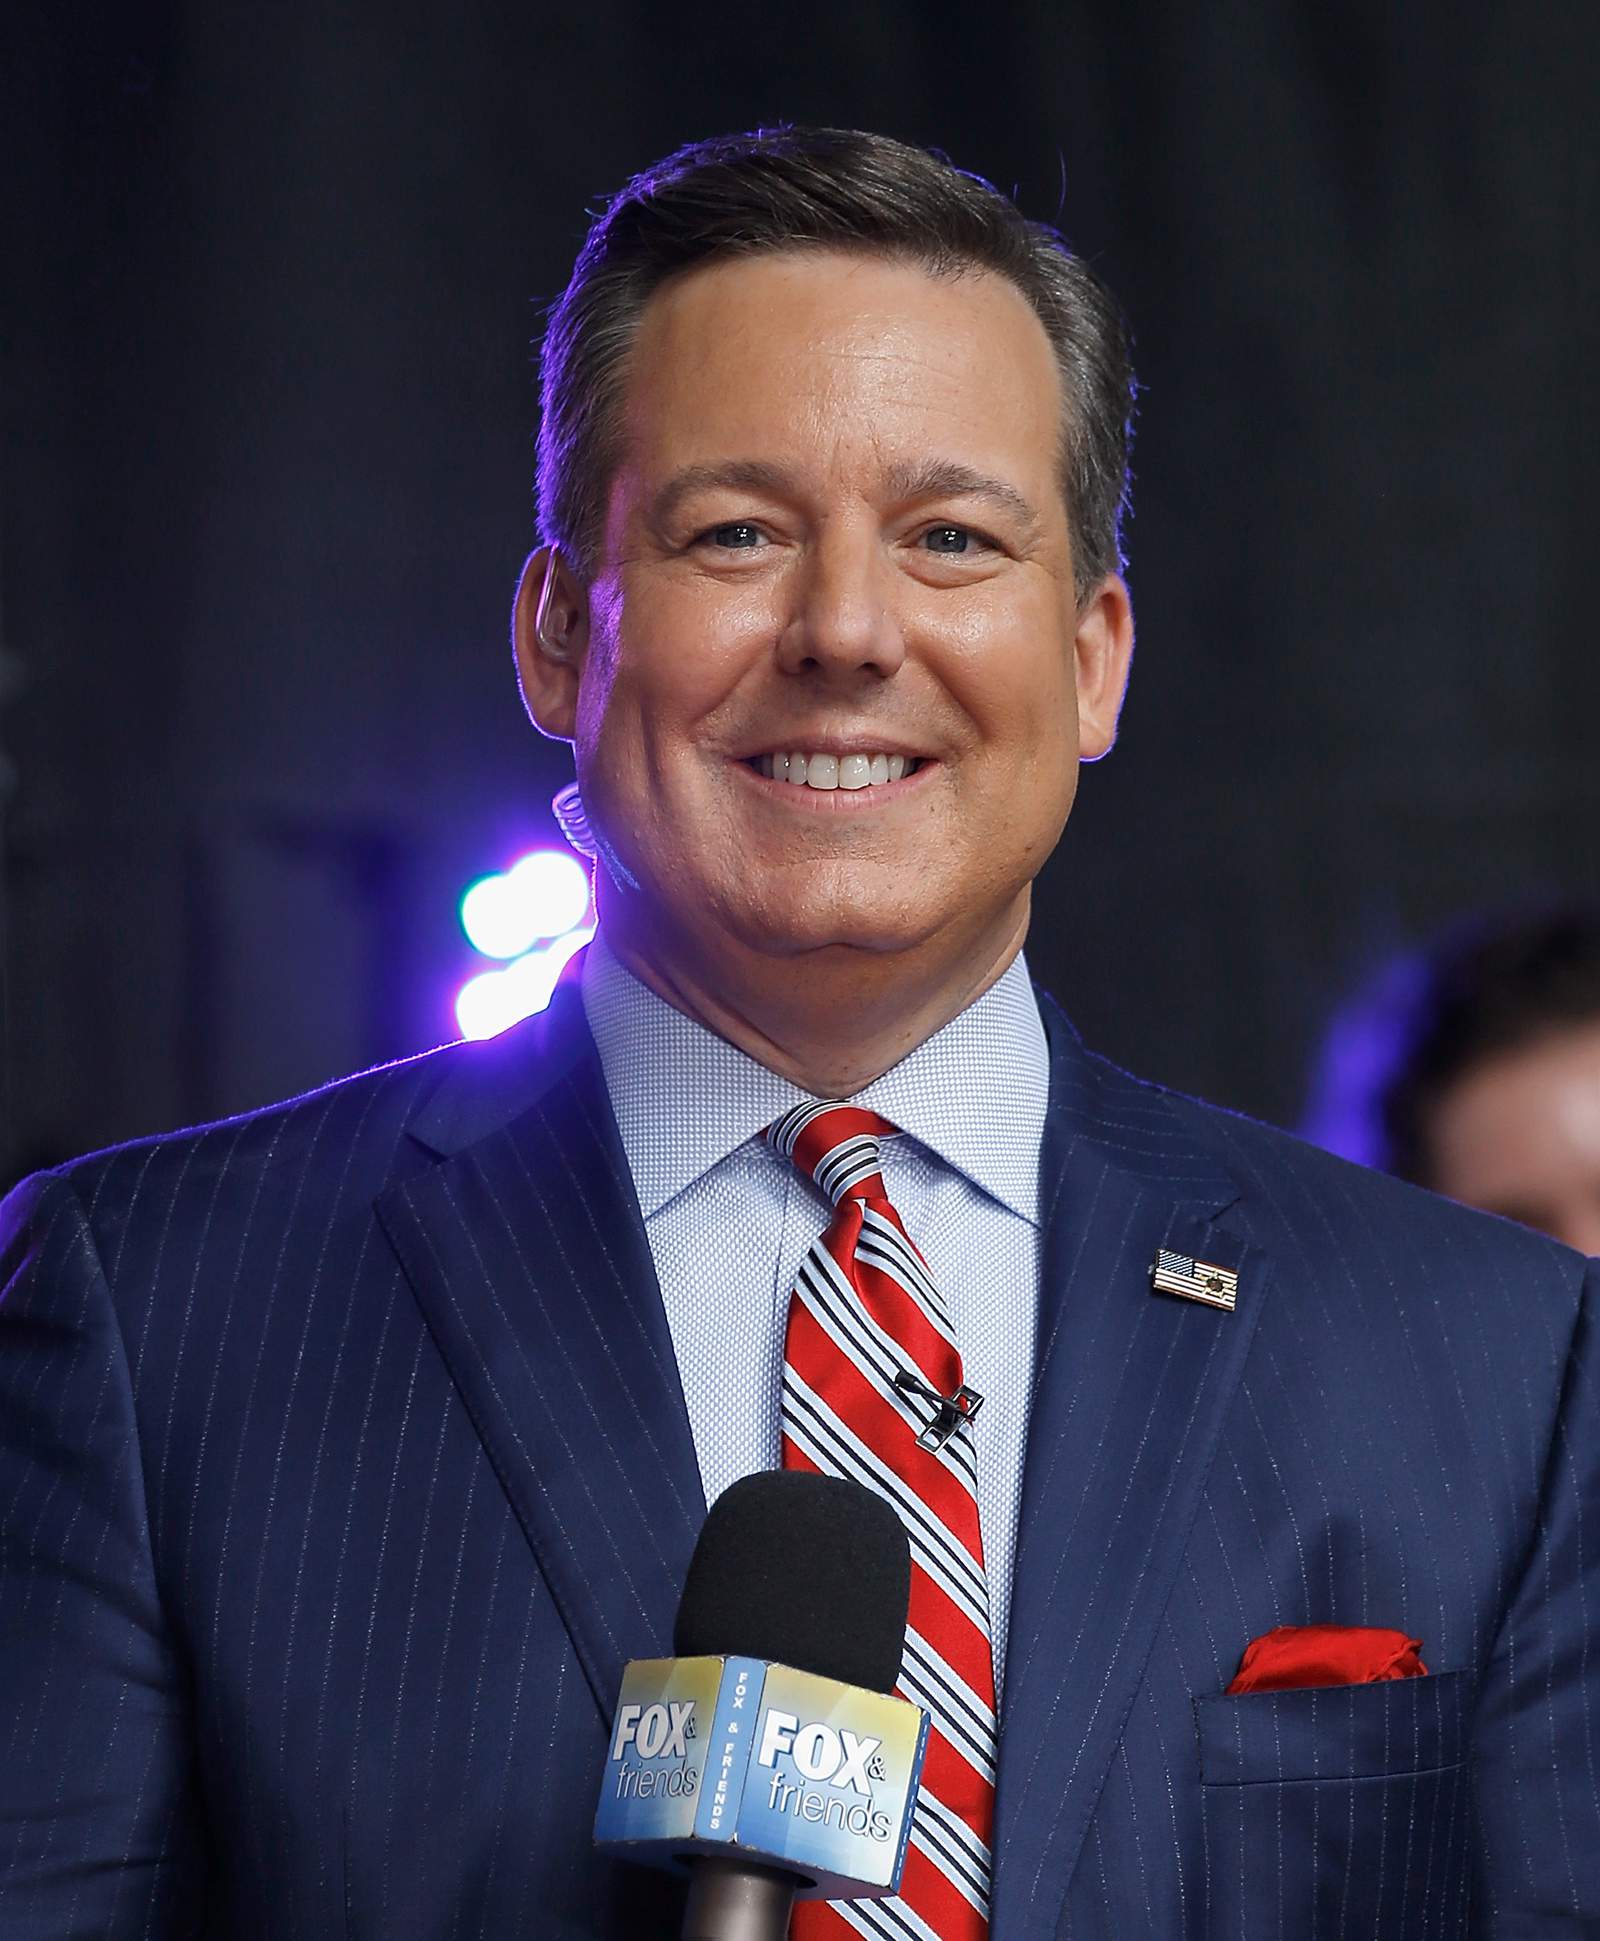 Fox News Ed Henry fired after sexual misconduct allegation